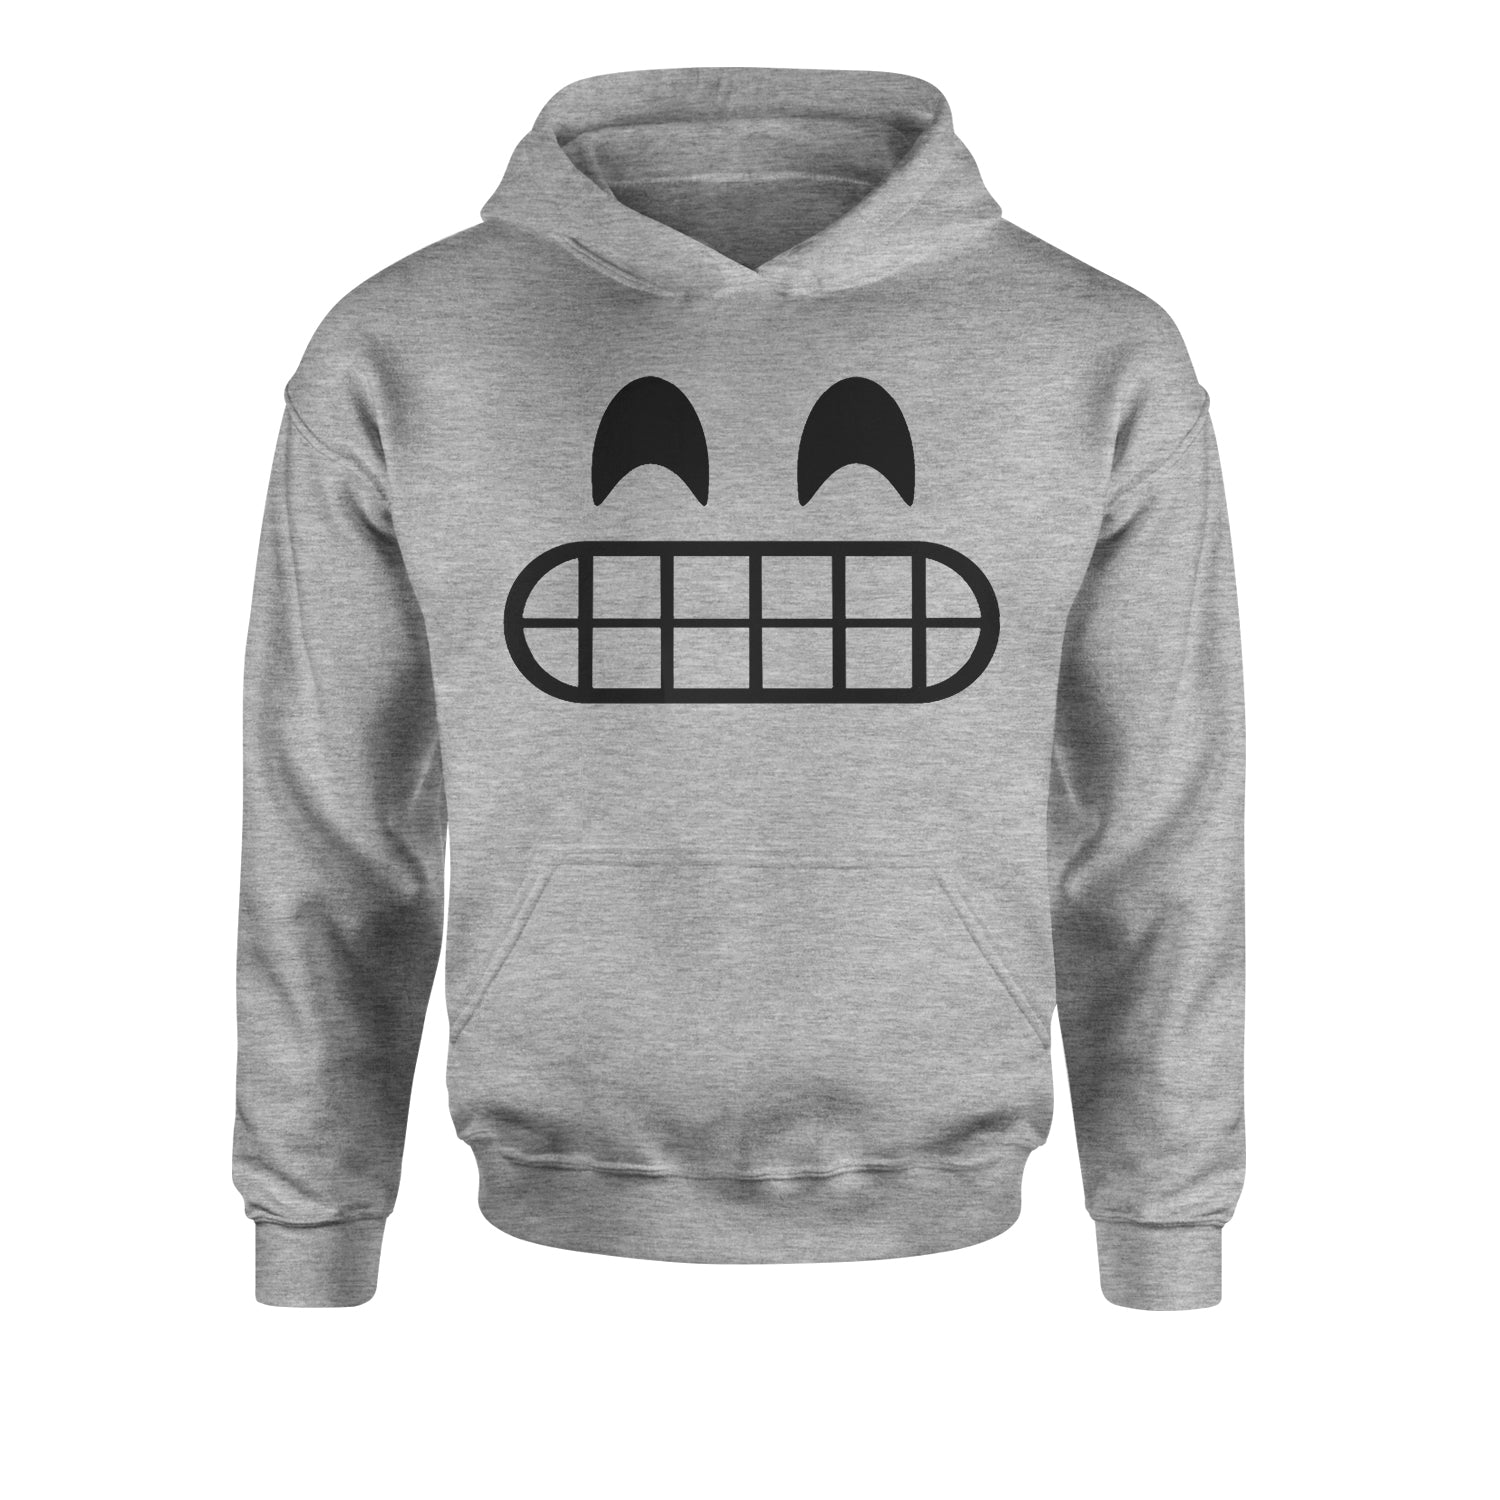 Emoticon Grinning Smile Face Youth-Sized Hoodie cosplay, costume, dress, emoji, emote, face, halloween, smiley, up, yellow, youth-sized by Expression Tees